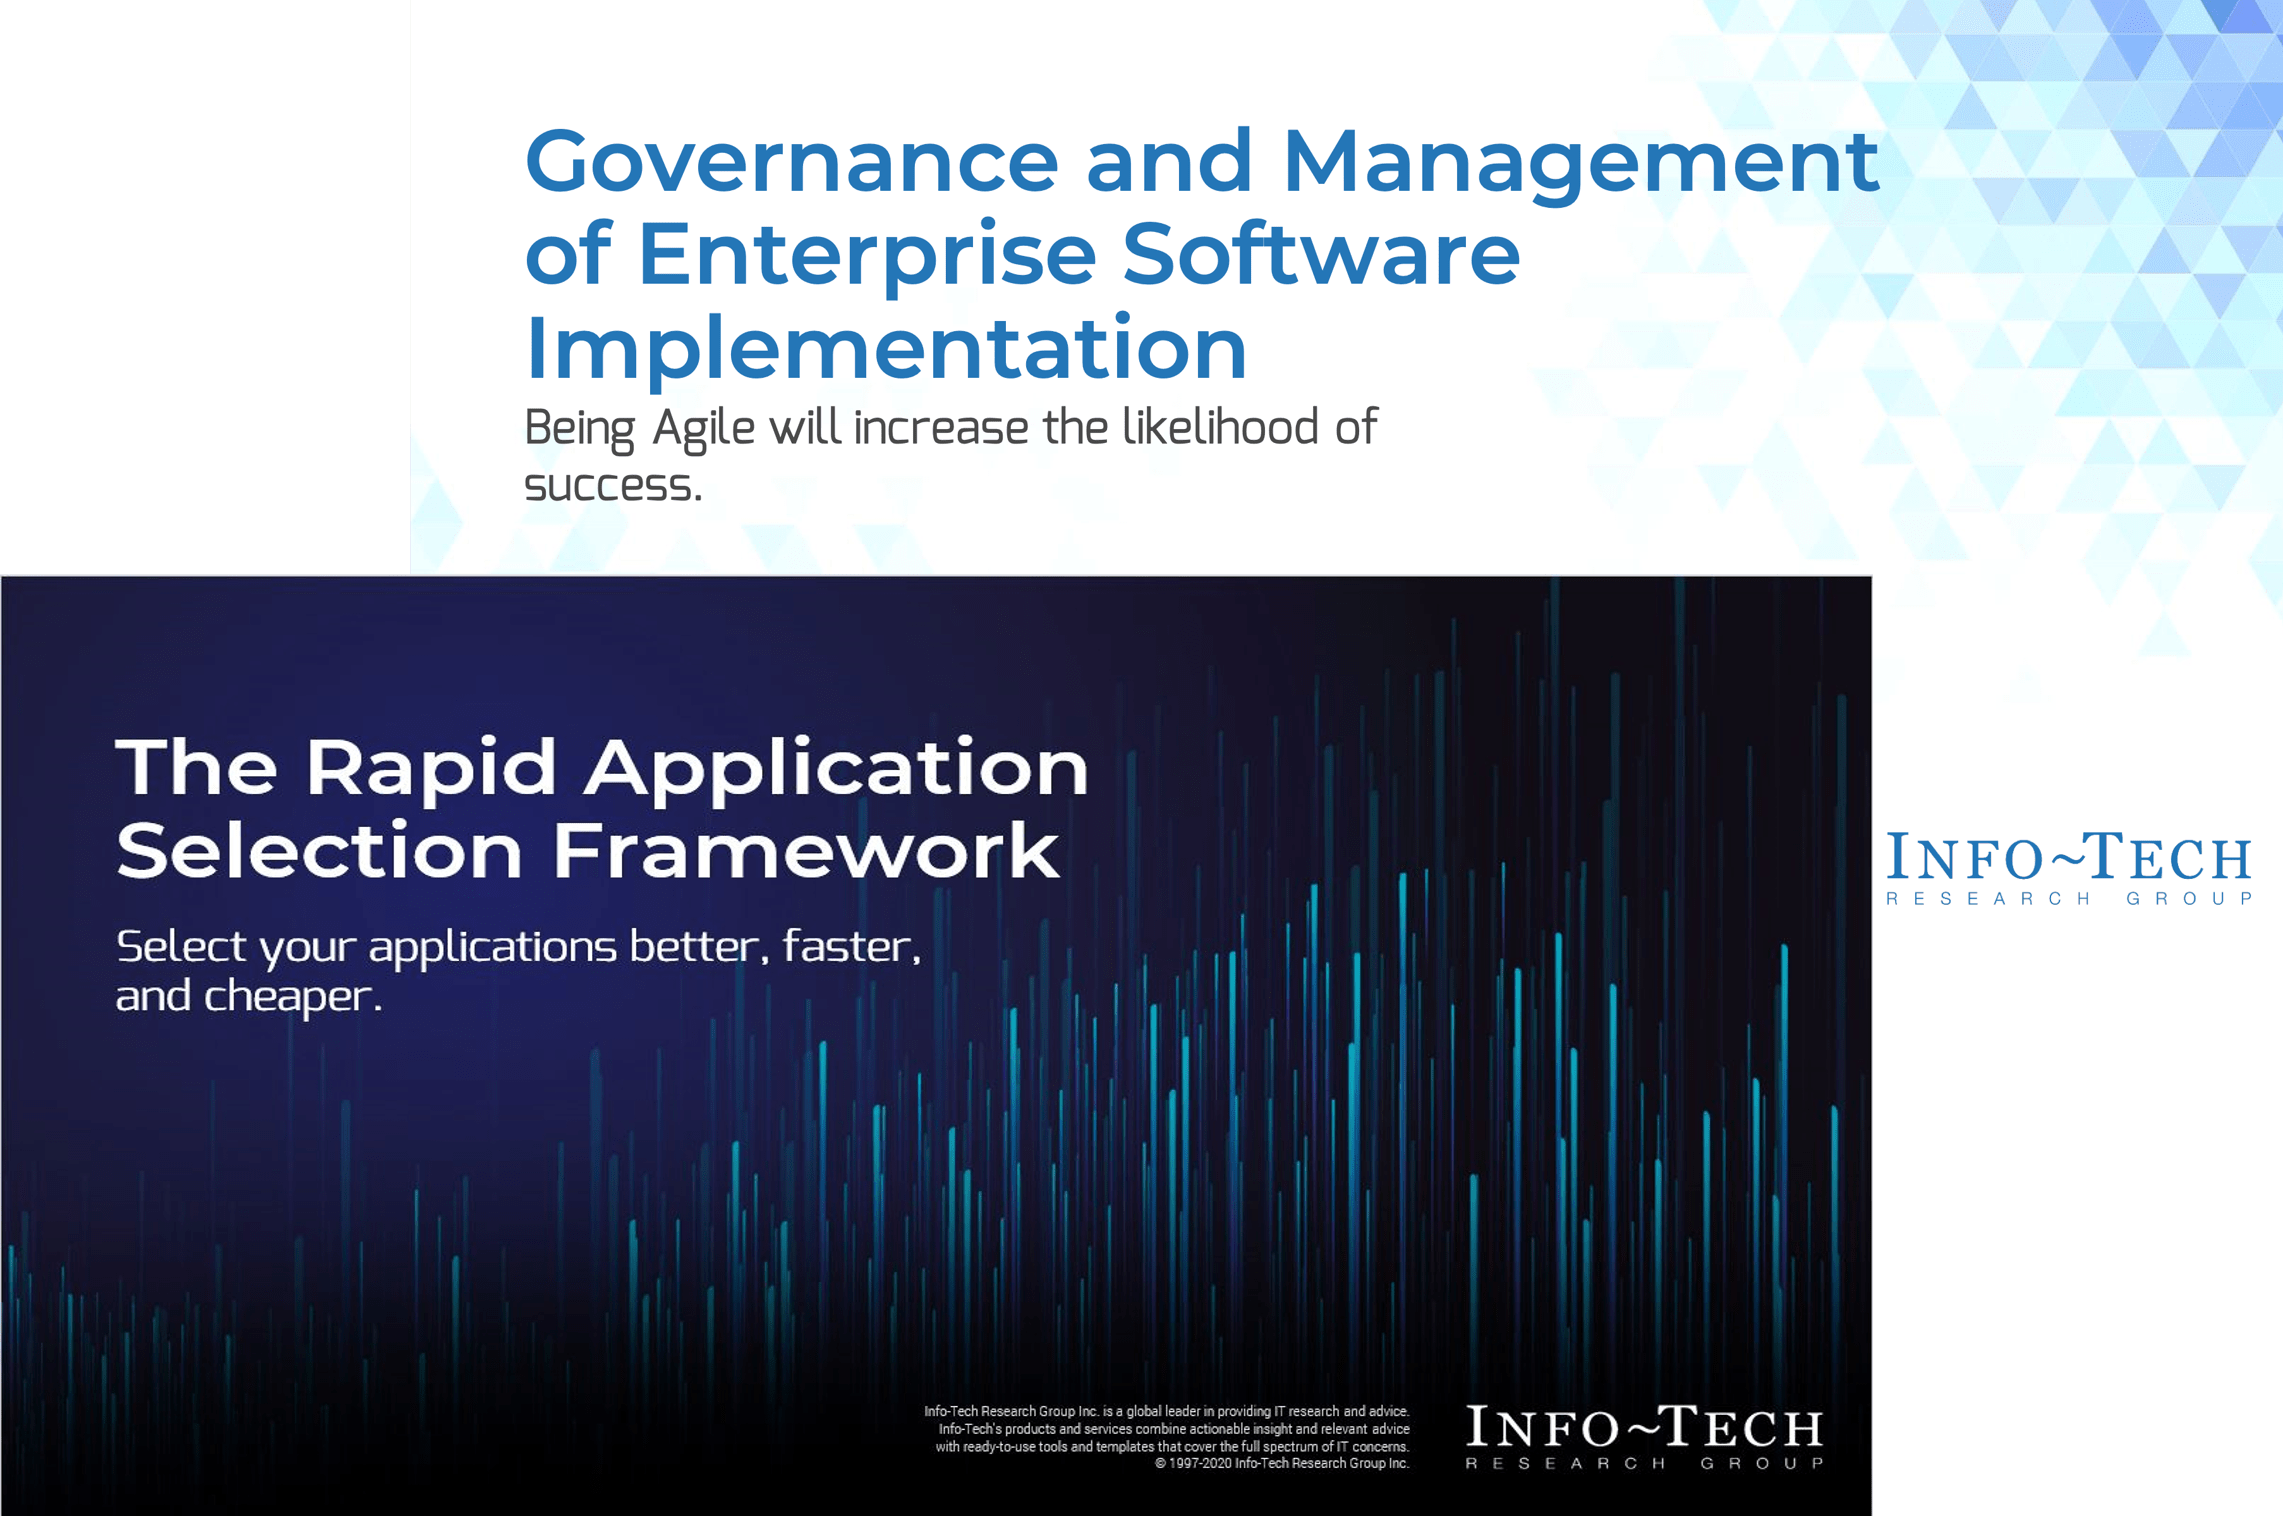 This is a screenshot of the title pages from INfo-tech's Governance and management of enterprise Software Implementaton; and The Rapid Applicaton Selection Framework.